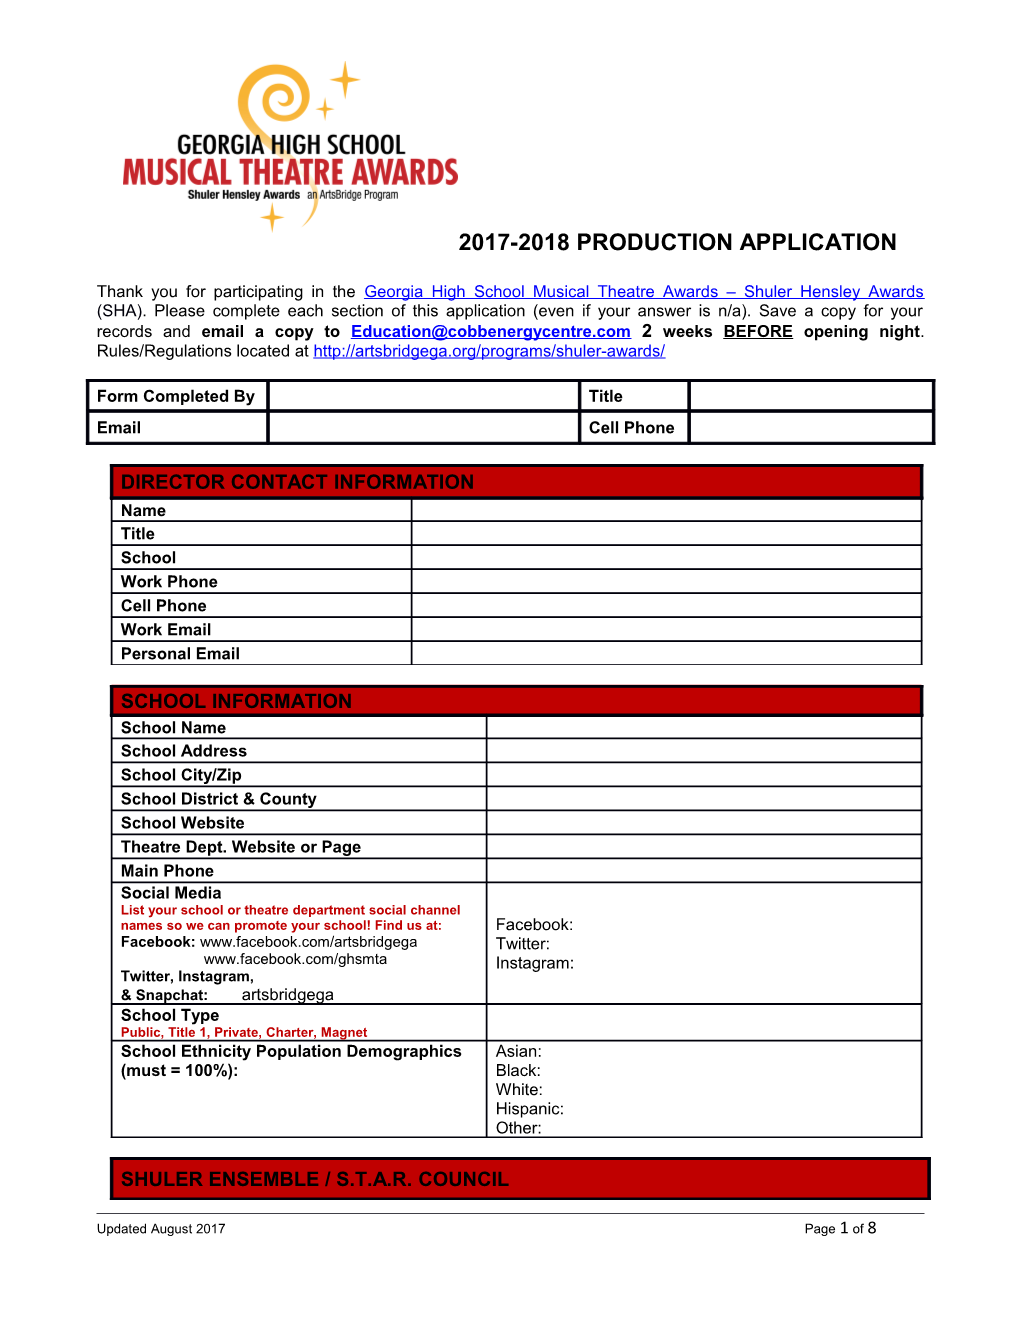 2017-2018 Production Application